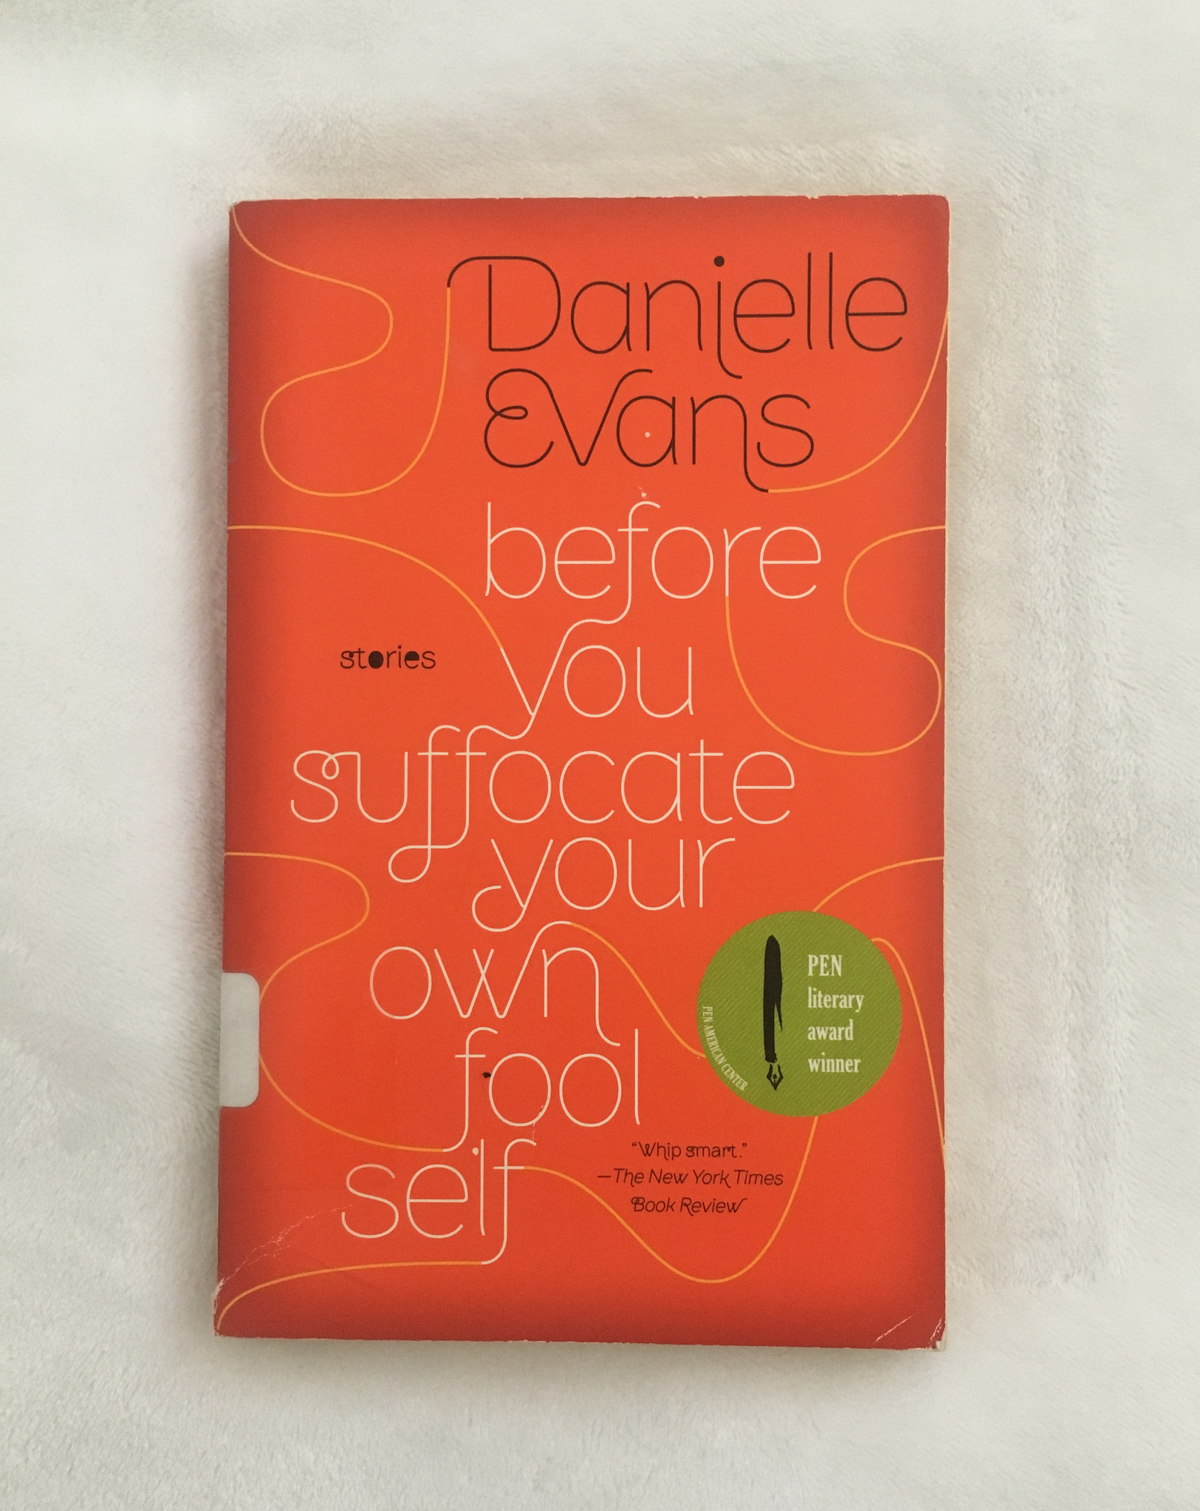 Before You Suffocate Your Own Fool Self by Danielle Evans, book, Ten Dollar Books, Ten Dollar Books